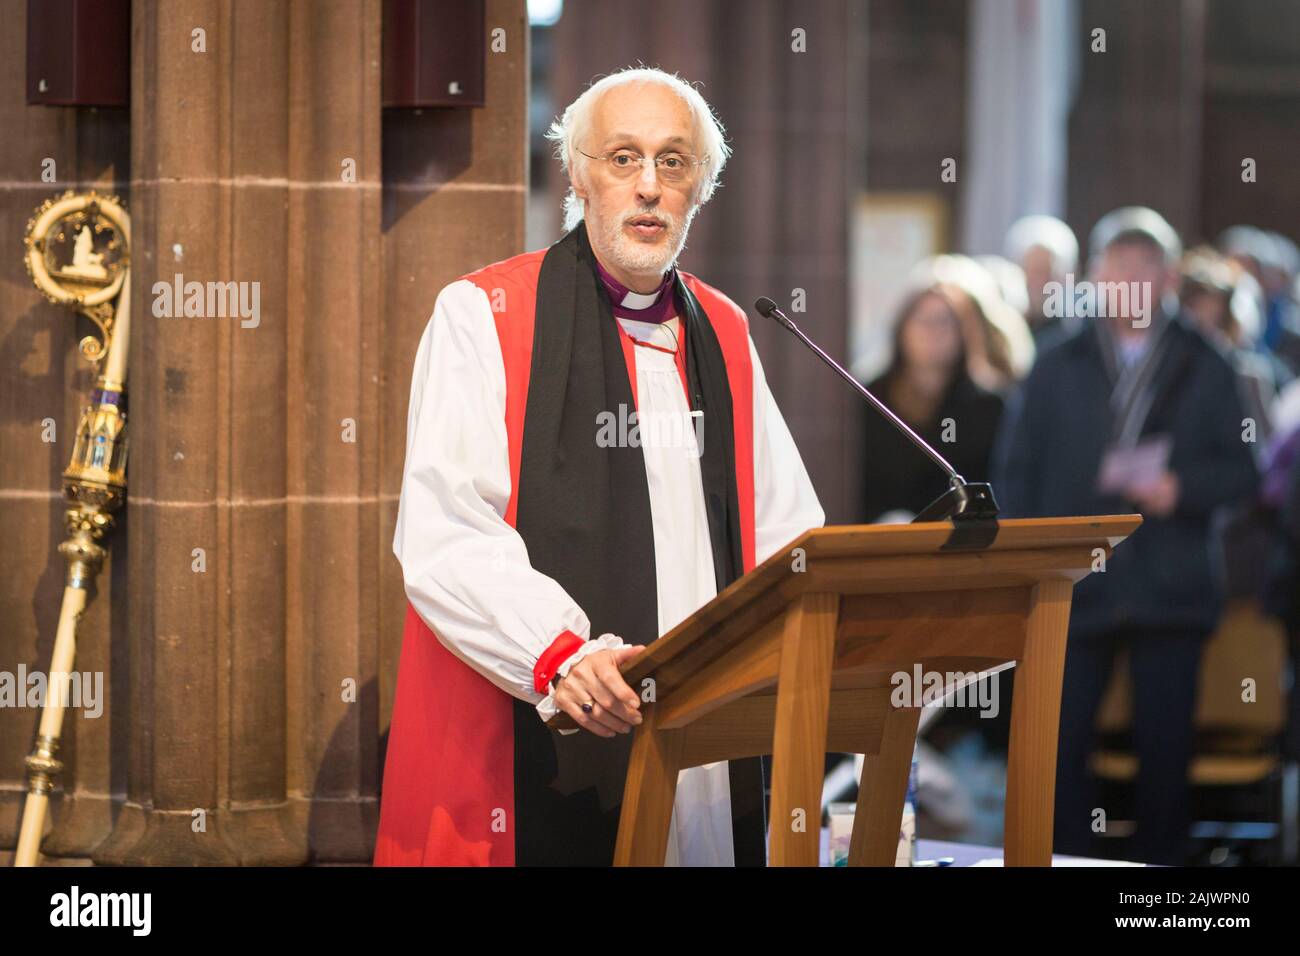 PICTURE BY CHRIS BULL FOR ST ANN'S HOSPICE  Light up a Life memorial service – Manchester Cathedral.  www.chrisbullphotographer.com Stock Photo